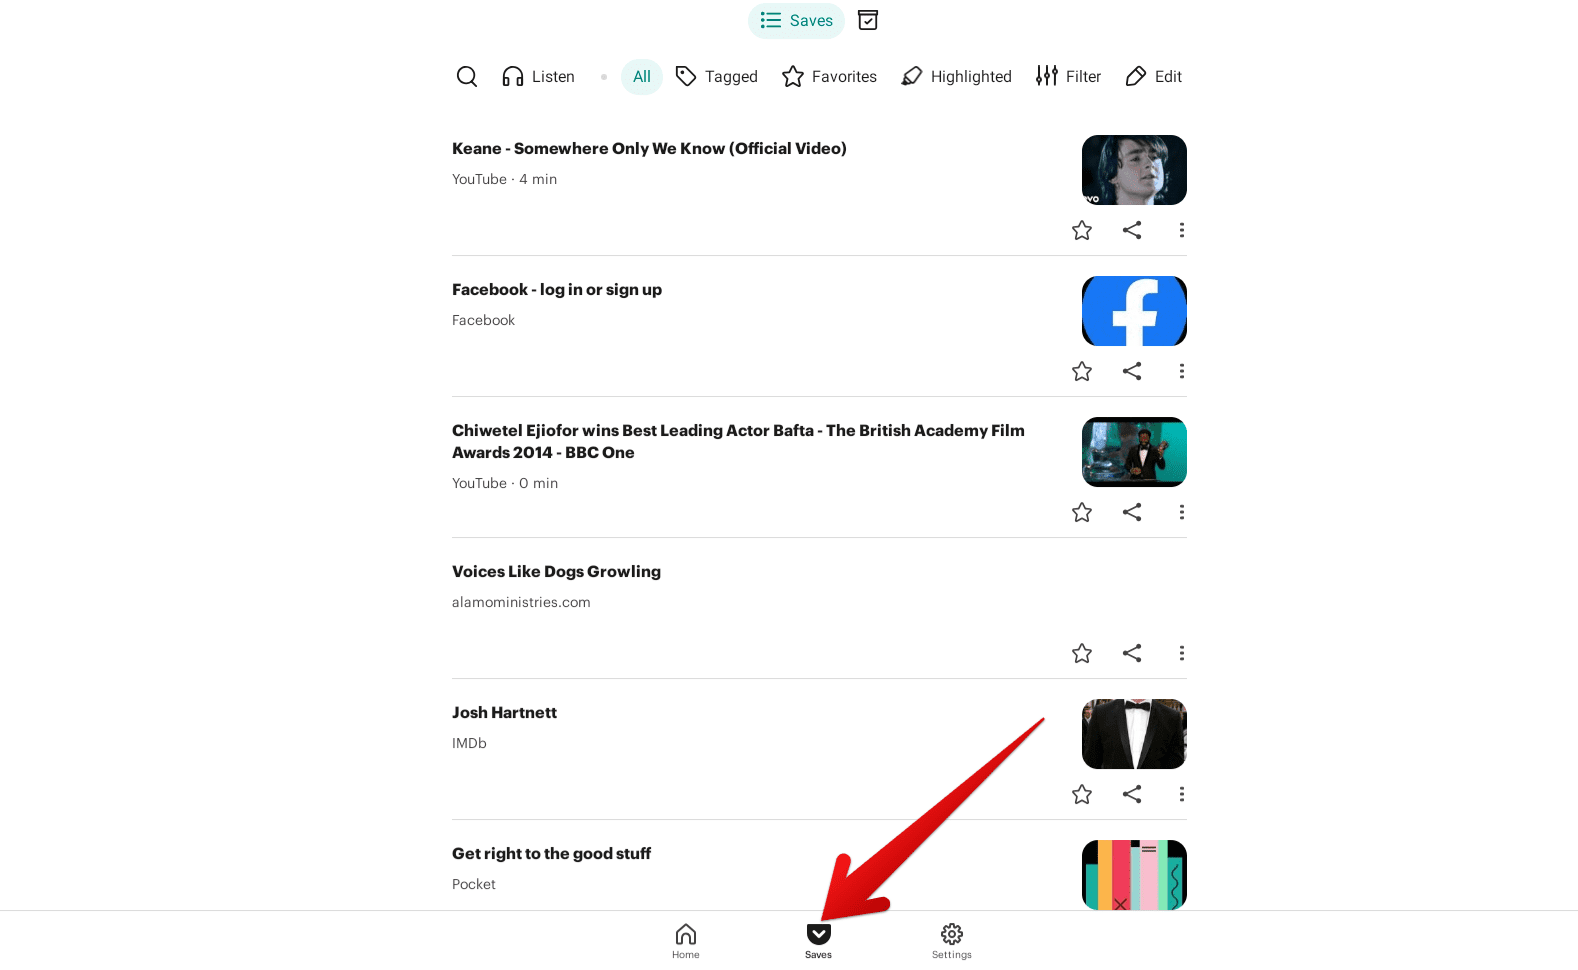 The "Saves" section in the Pocket app